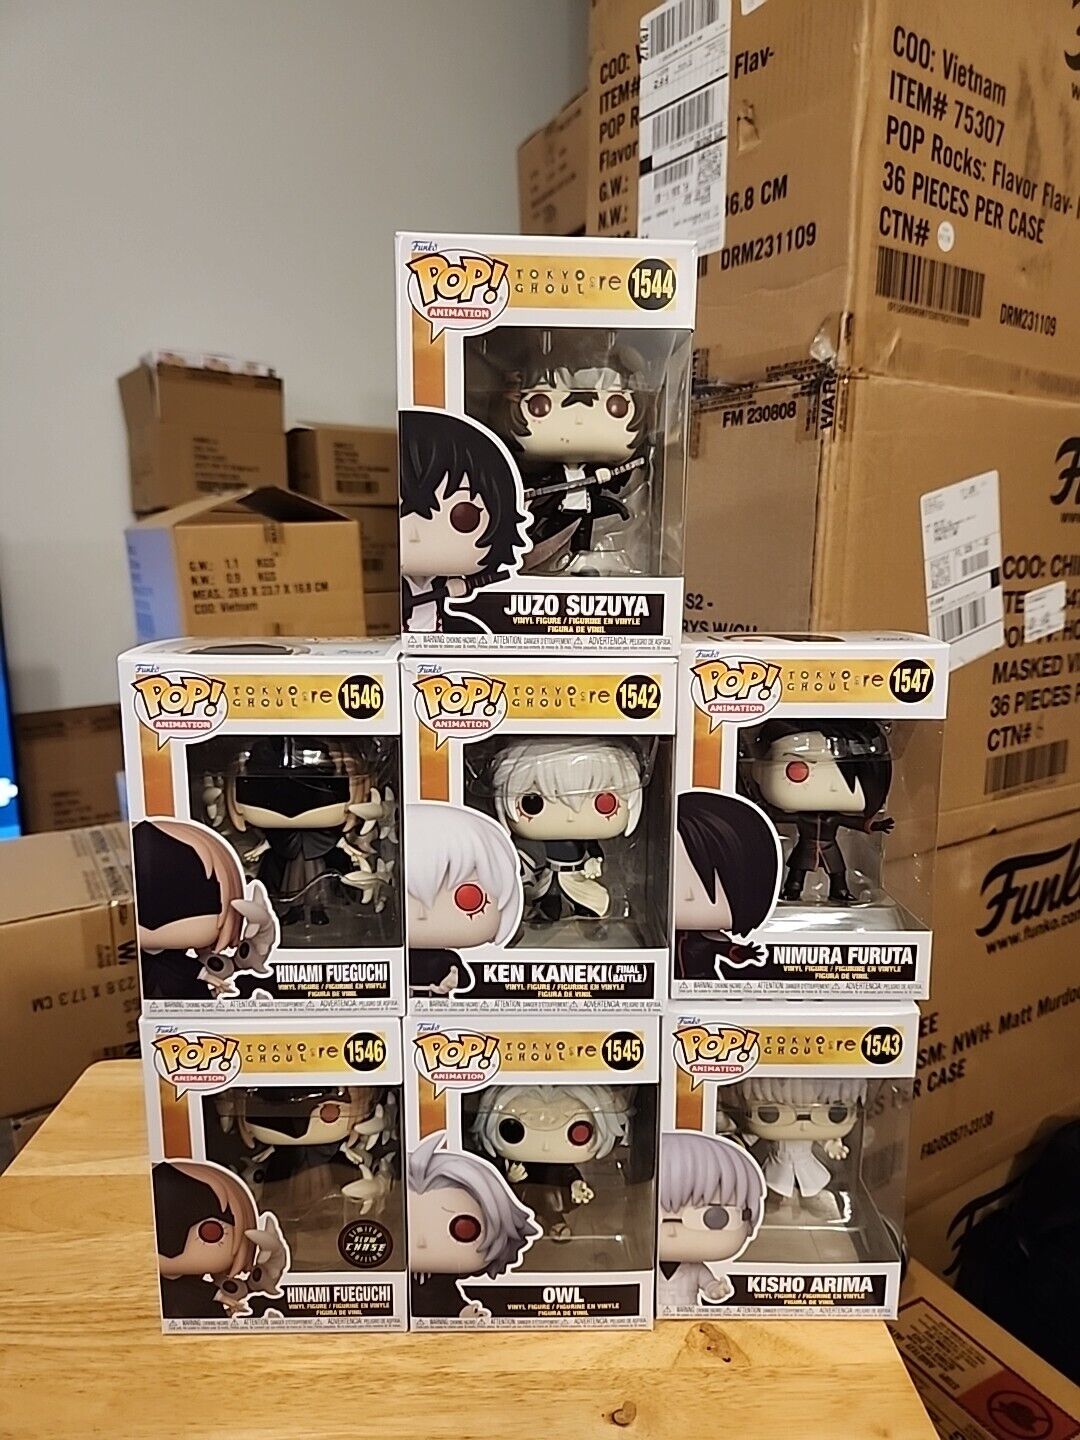 Funko Pop Tokyo Ghoul:Re S3 Complete Set of 7 with Hinami Fueguchi CHASE - MINT